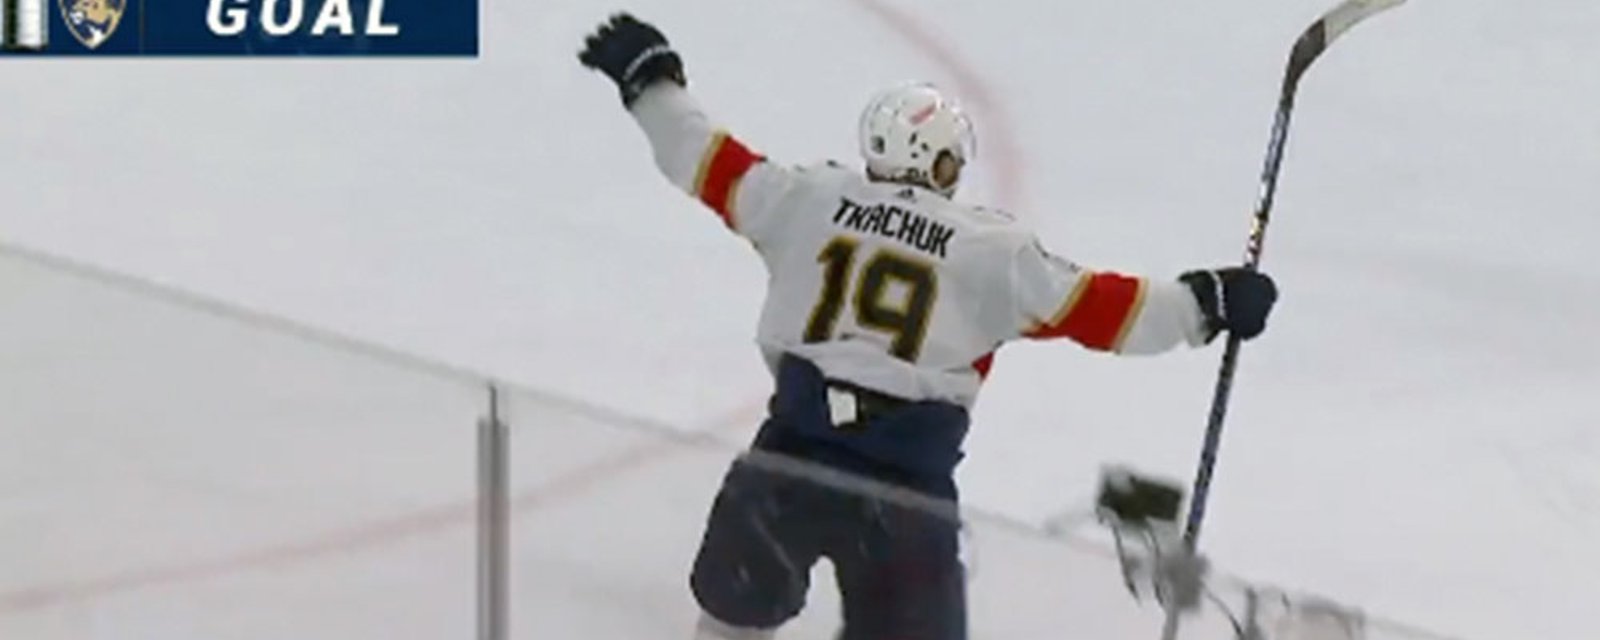 Tkachuk scores to win with 12 seconds left in the 4th OT